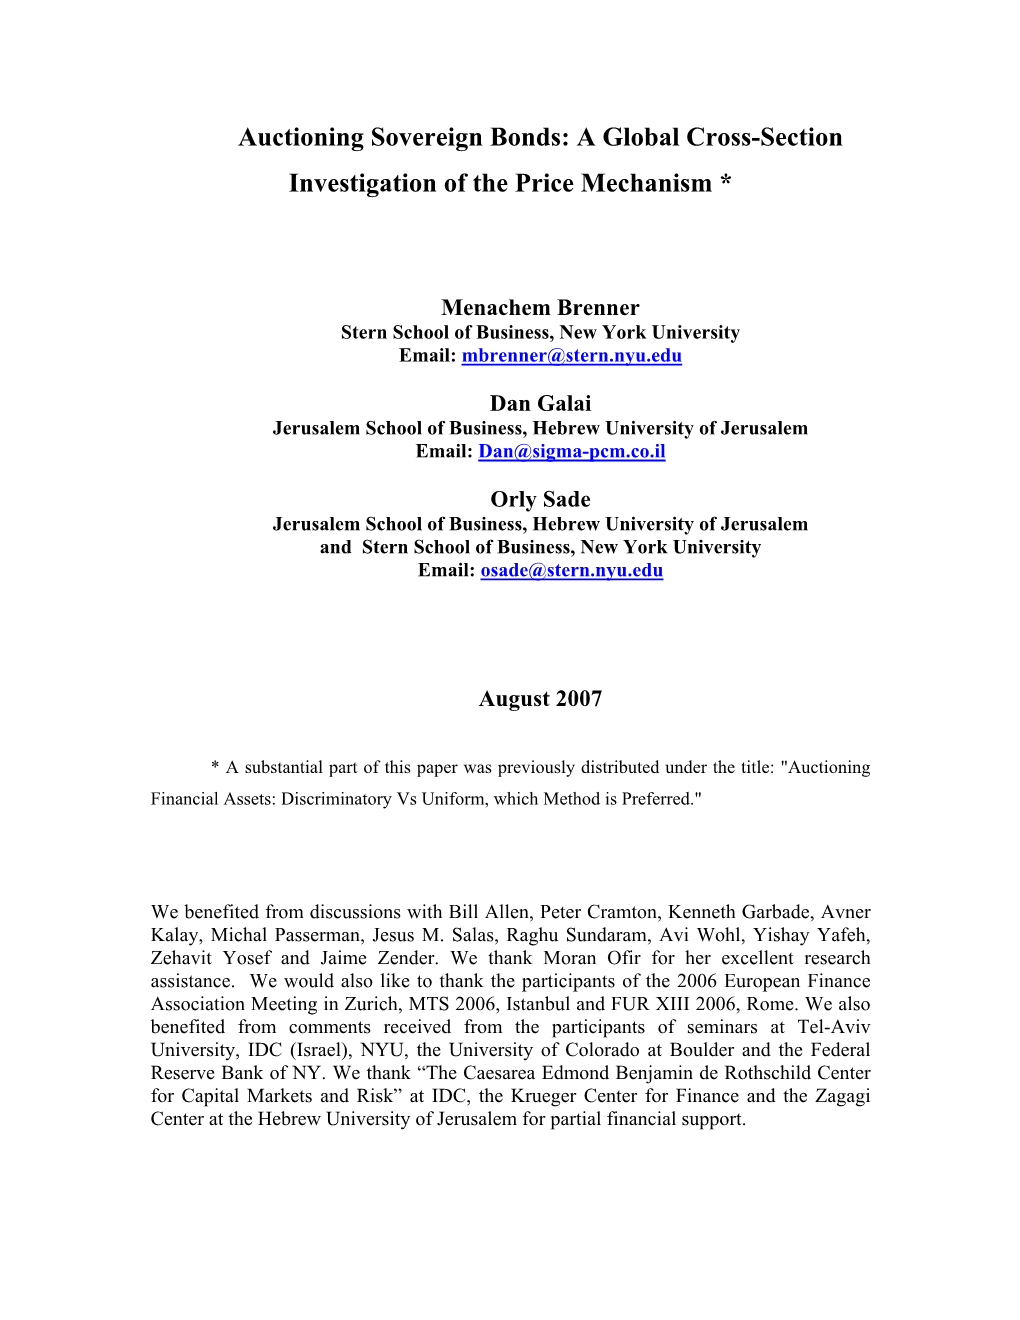 Auctioning Sovereign Bonds: a Global Cross-Section Investigation of the Price Mechanism *